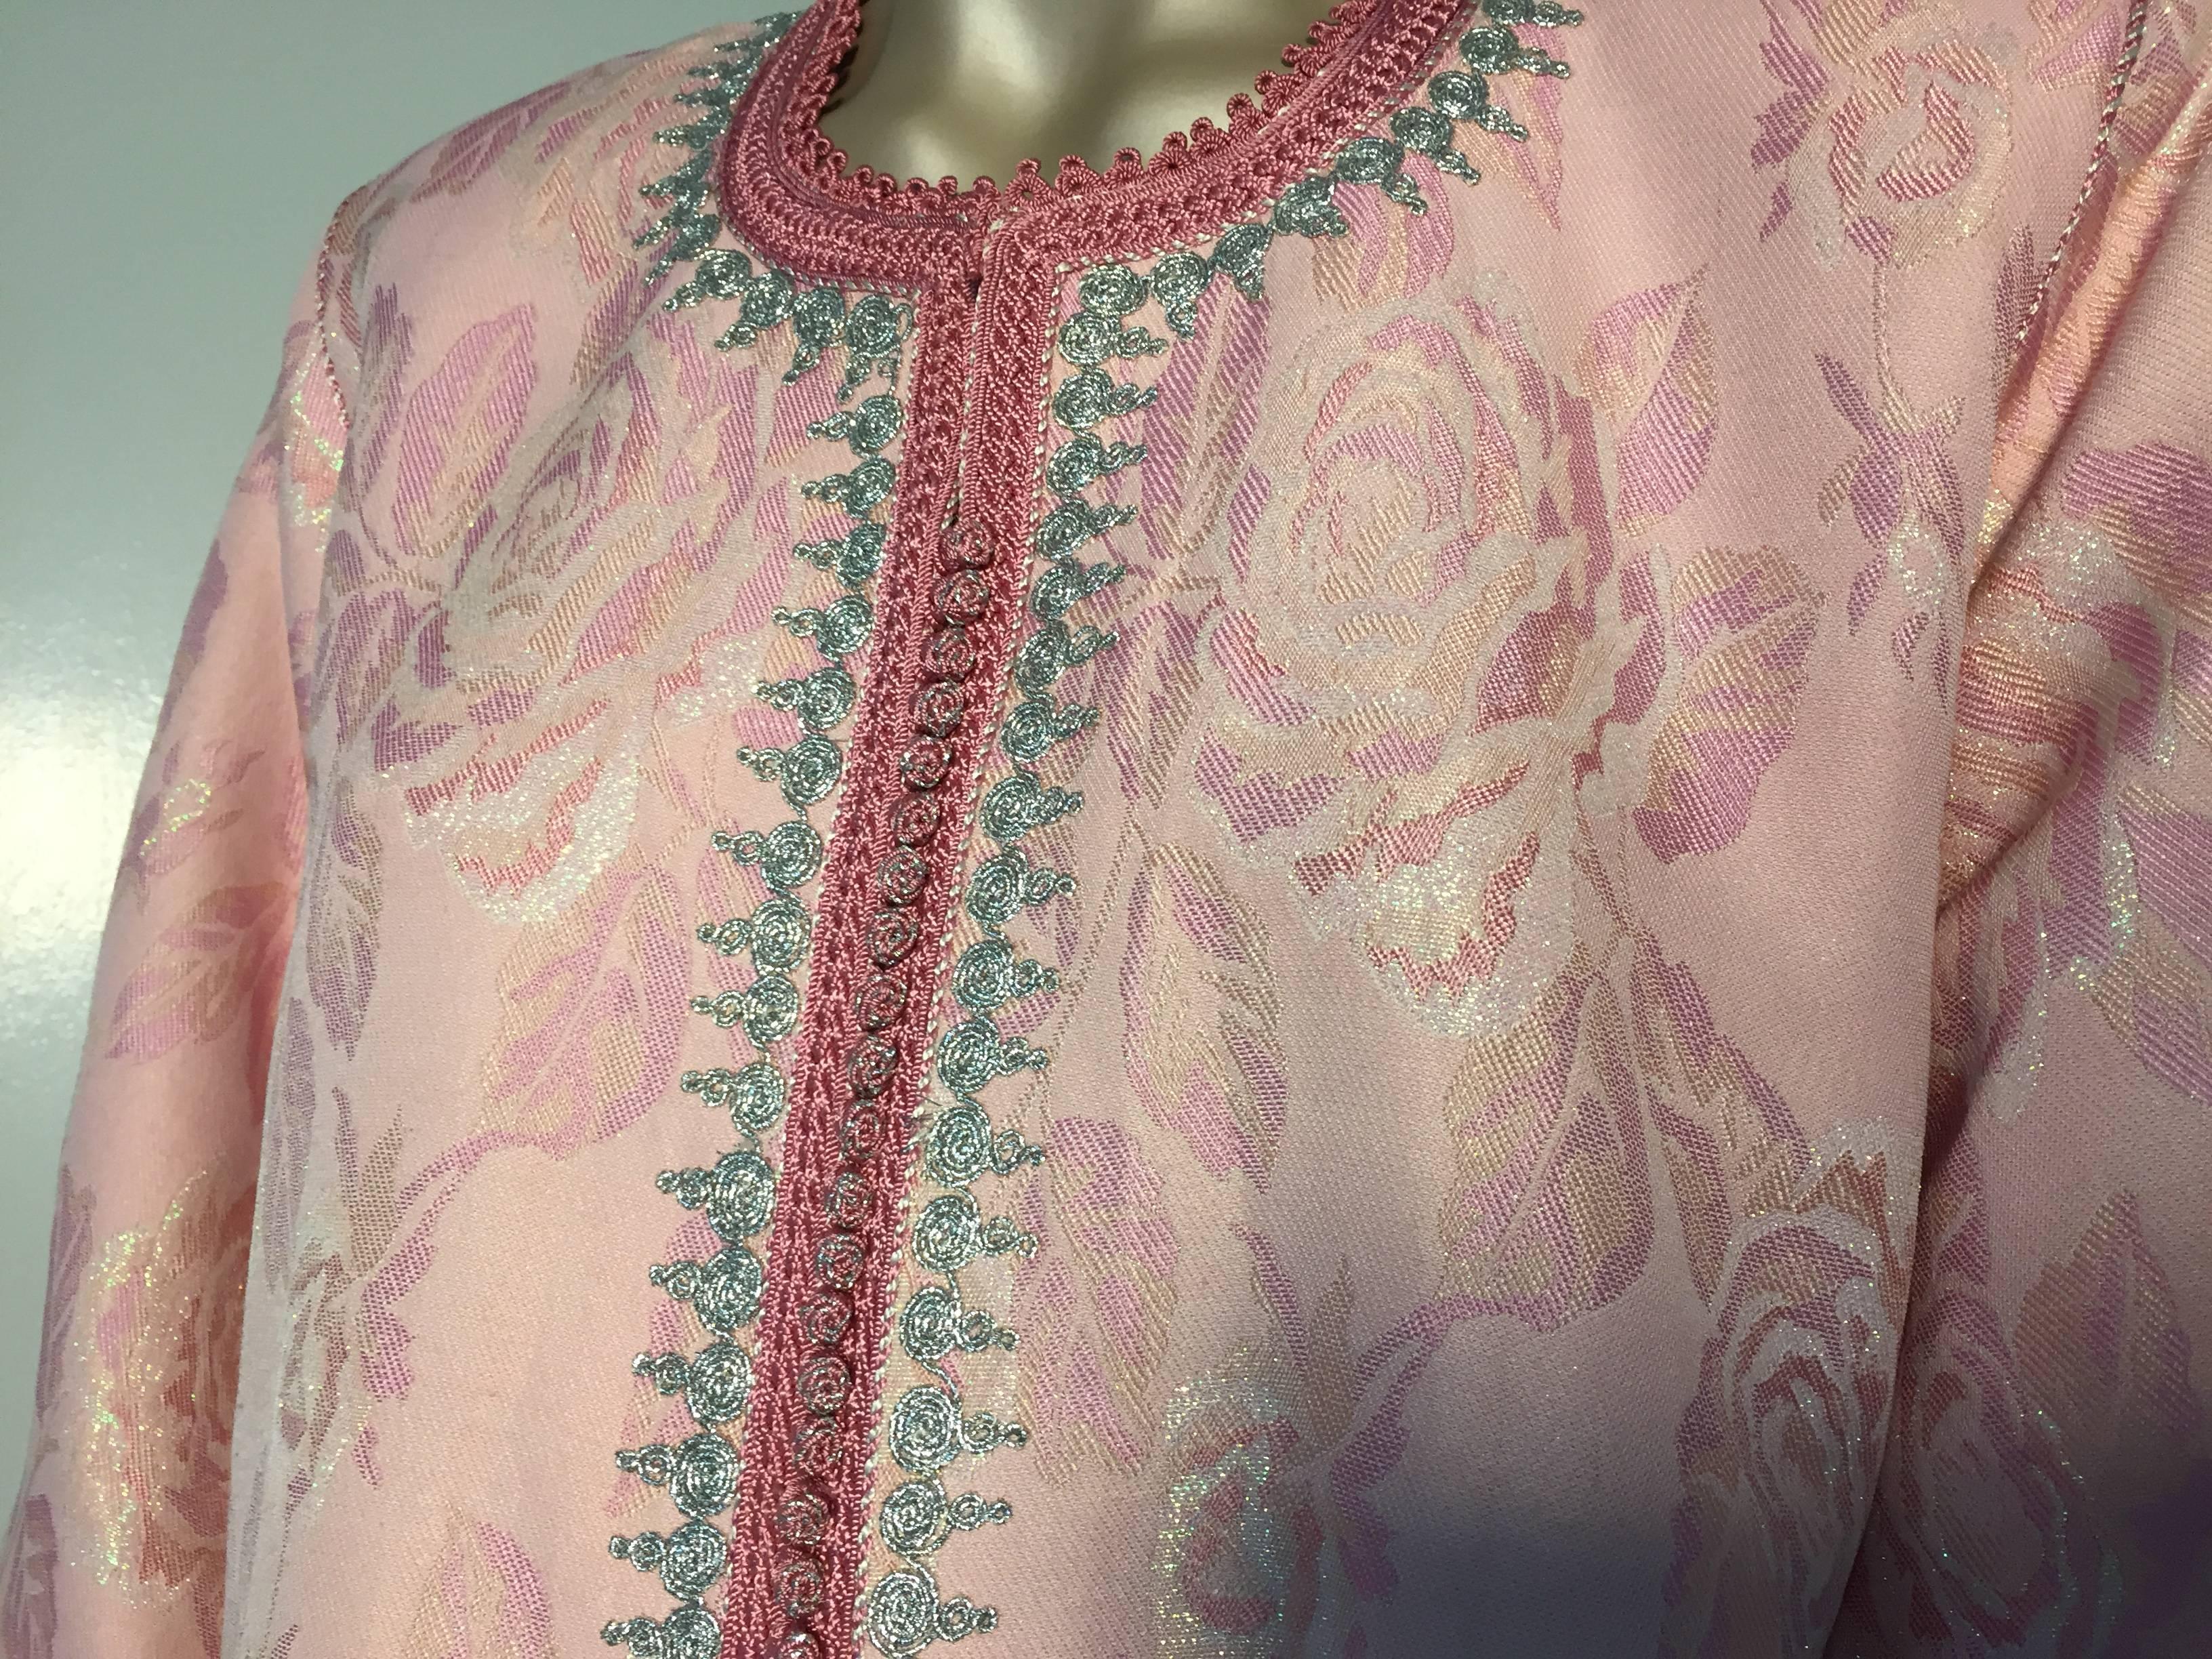 Hand-Crafted Elegant Moroccan Caftan in Pink and Silver Metallic Brocade